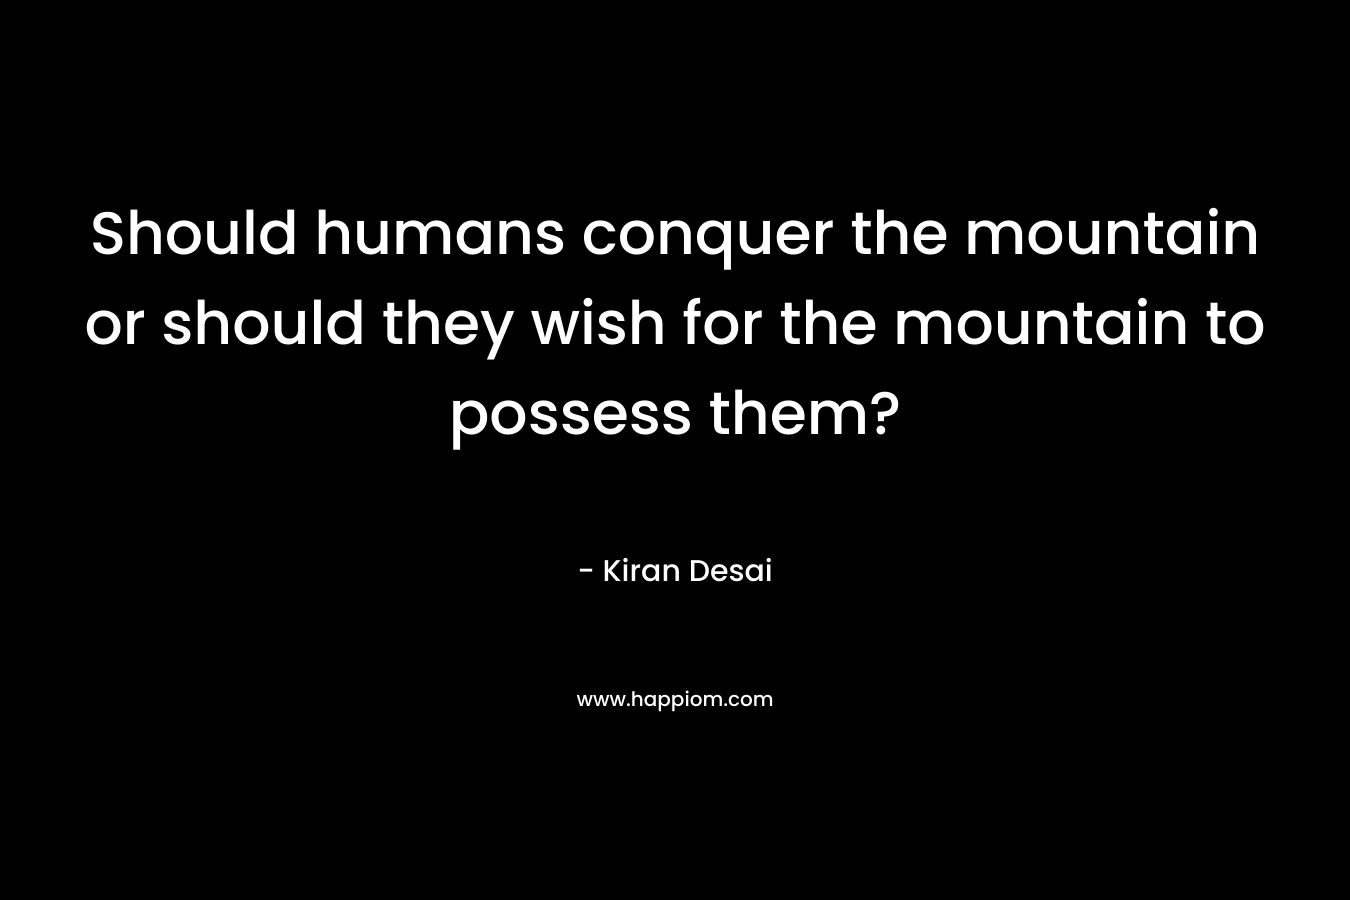 Should humans conquer the mountain or should they wish for the mountain to possess them?